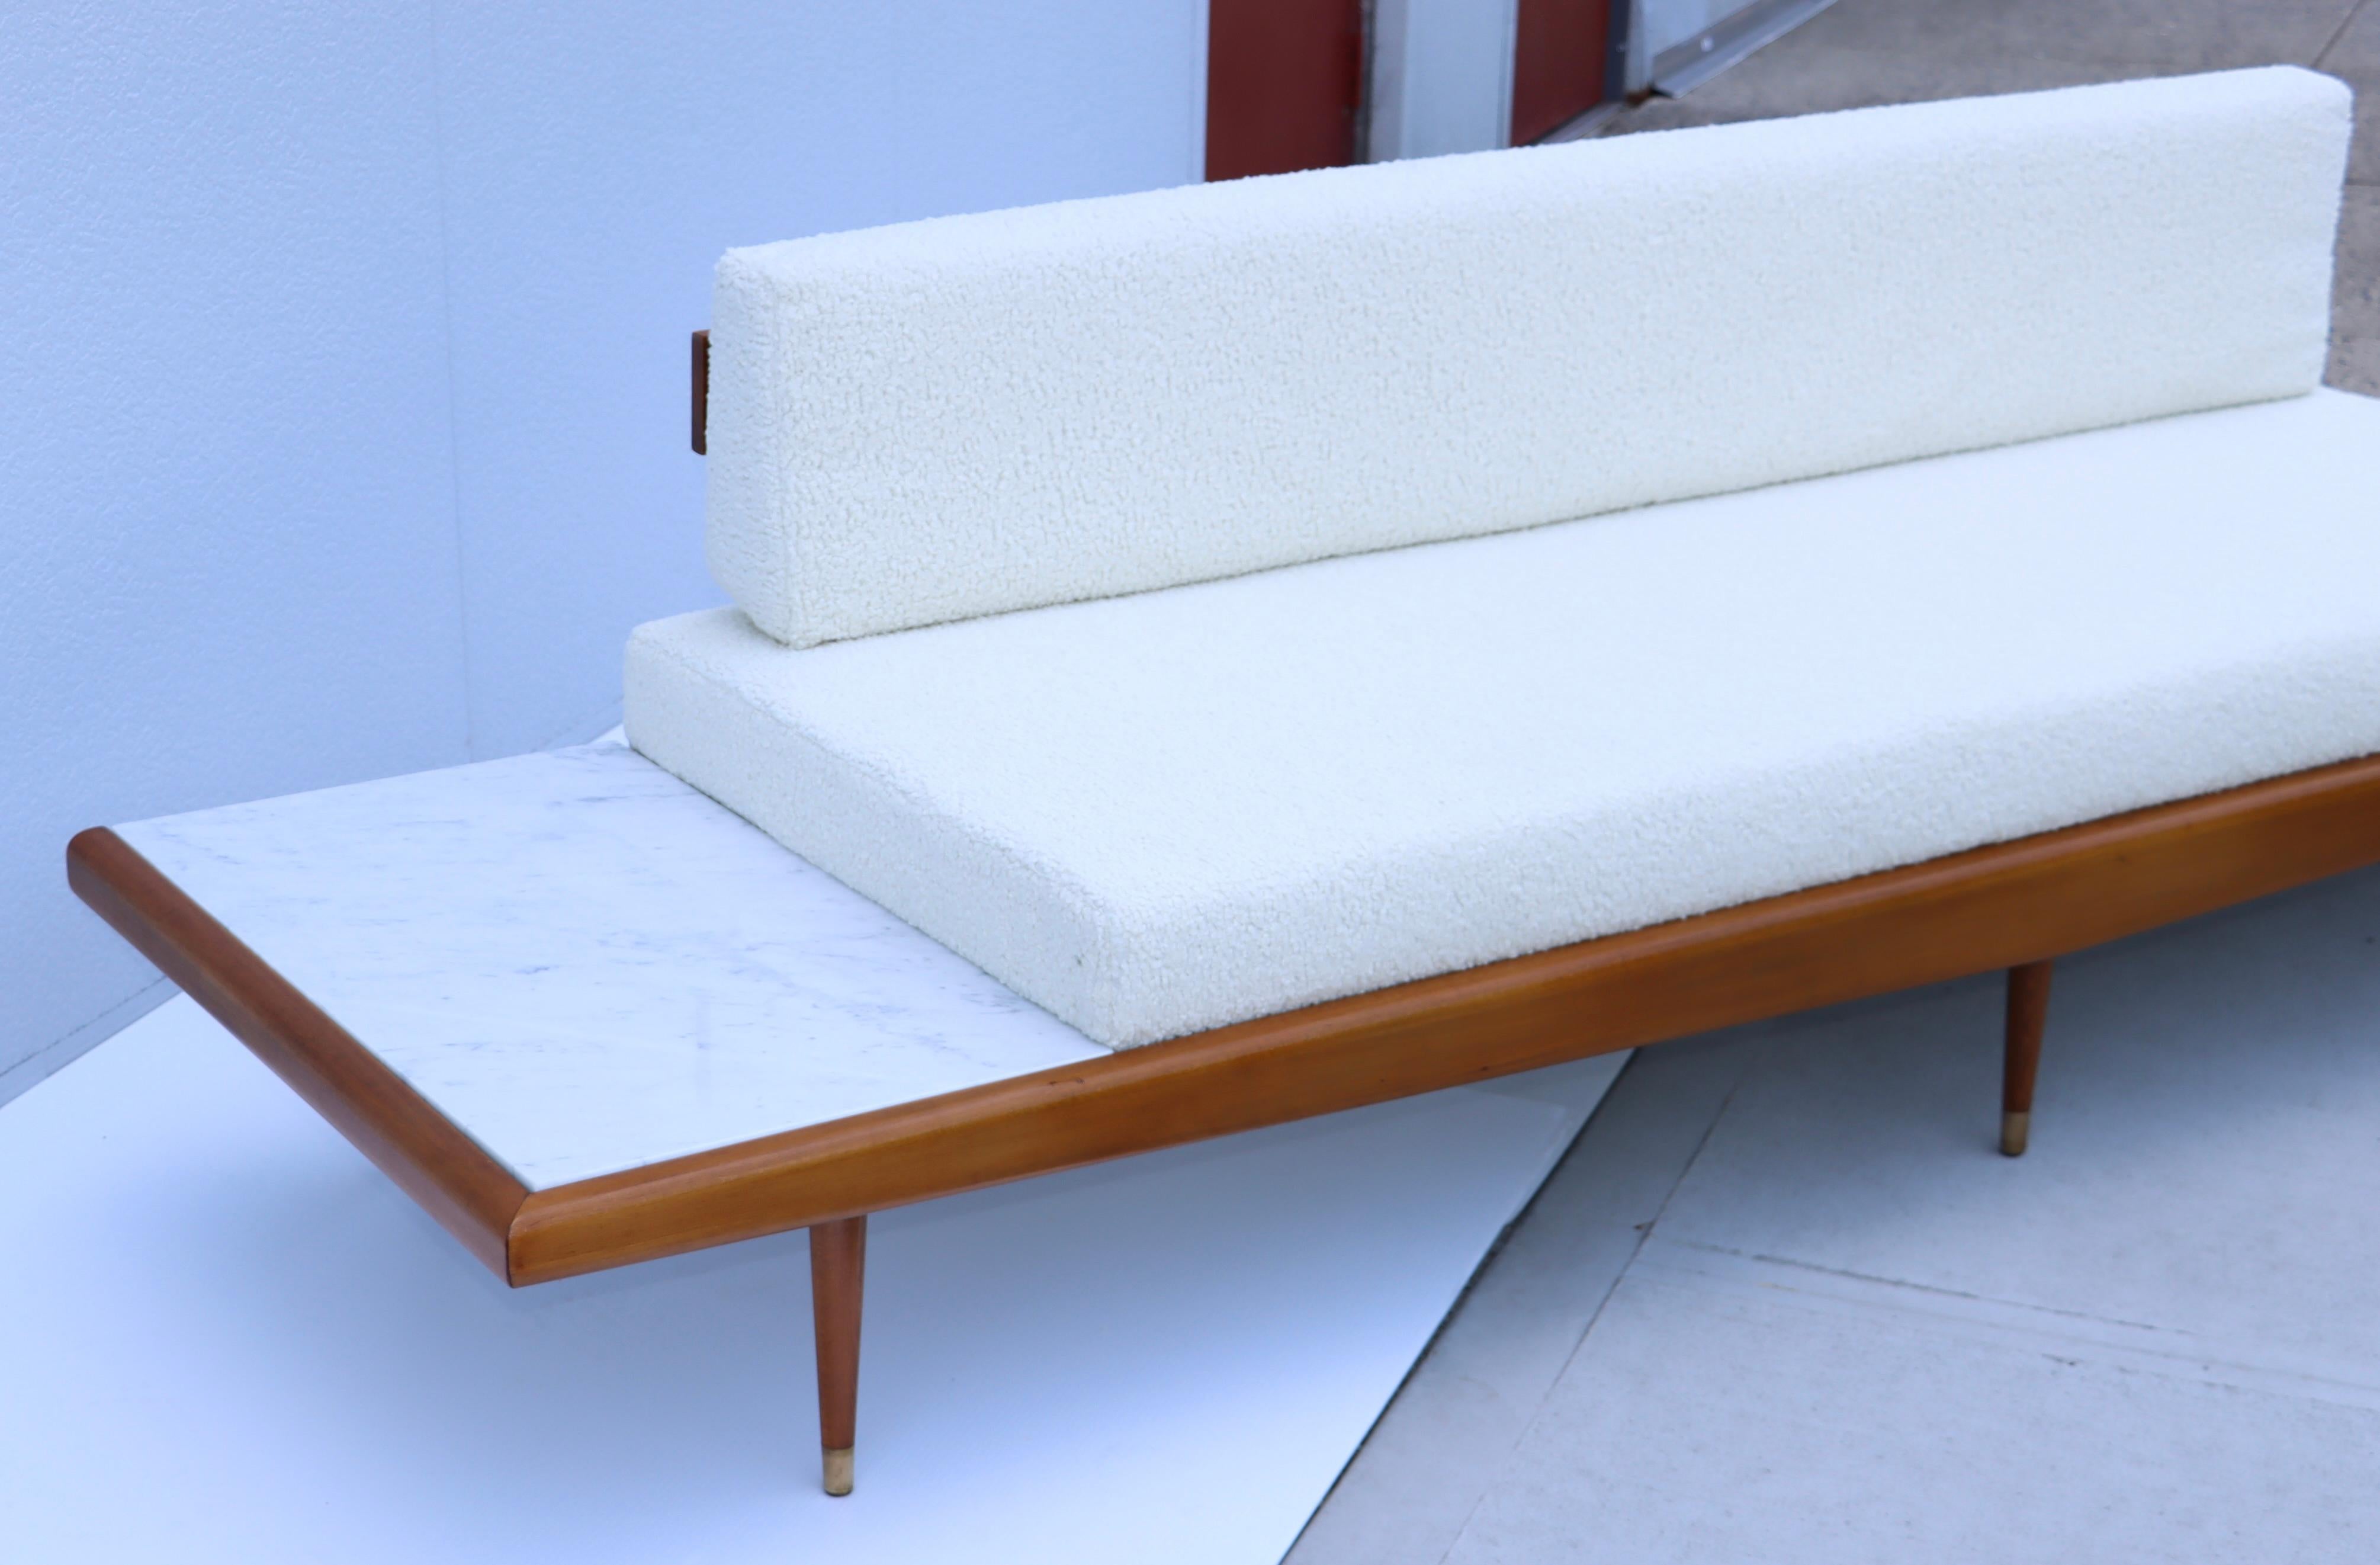 Stunning 1960's Mid-Century Modern beech wood frame floating sofa with Carrara marble end tables and Bouclé upholstery cushions designed Adrian Pearsall for Craft Associates, lightly restored with minor wear and patina to the wood.